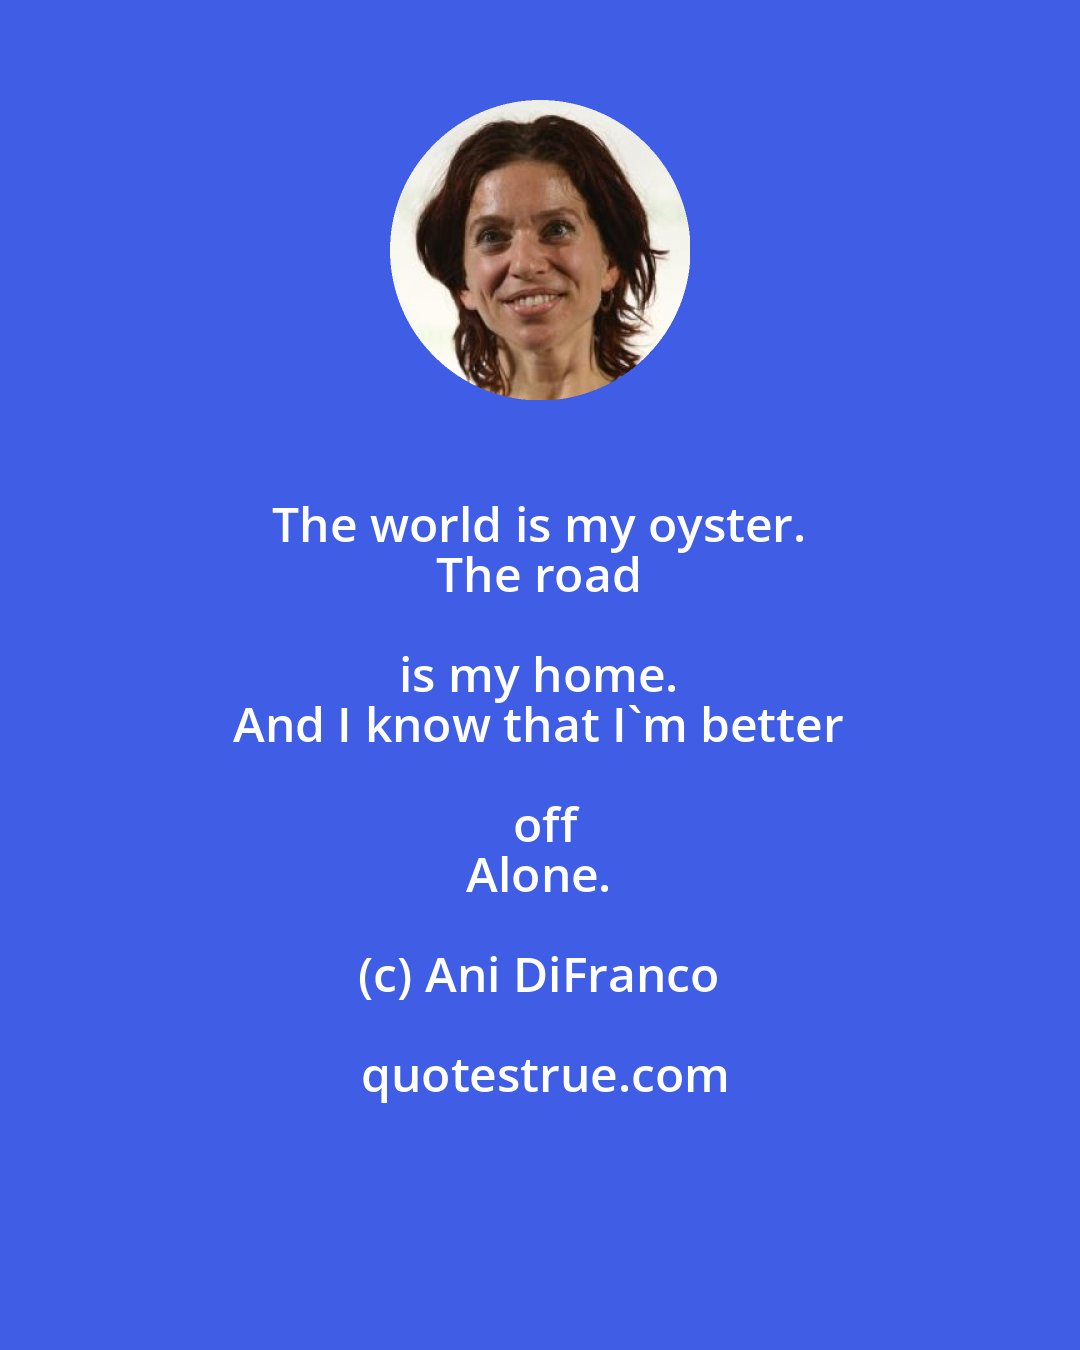 Ani DiFranco: The world is my oyster. 
 The road is my home. 
 And I know that I'm better off
 Alone.